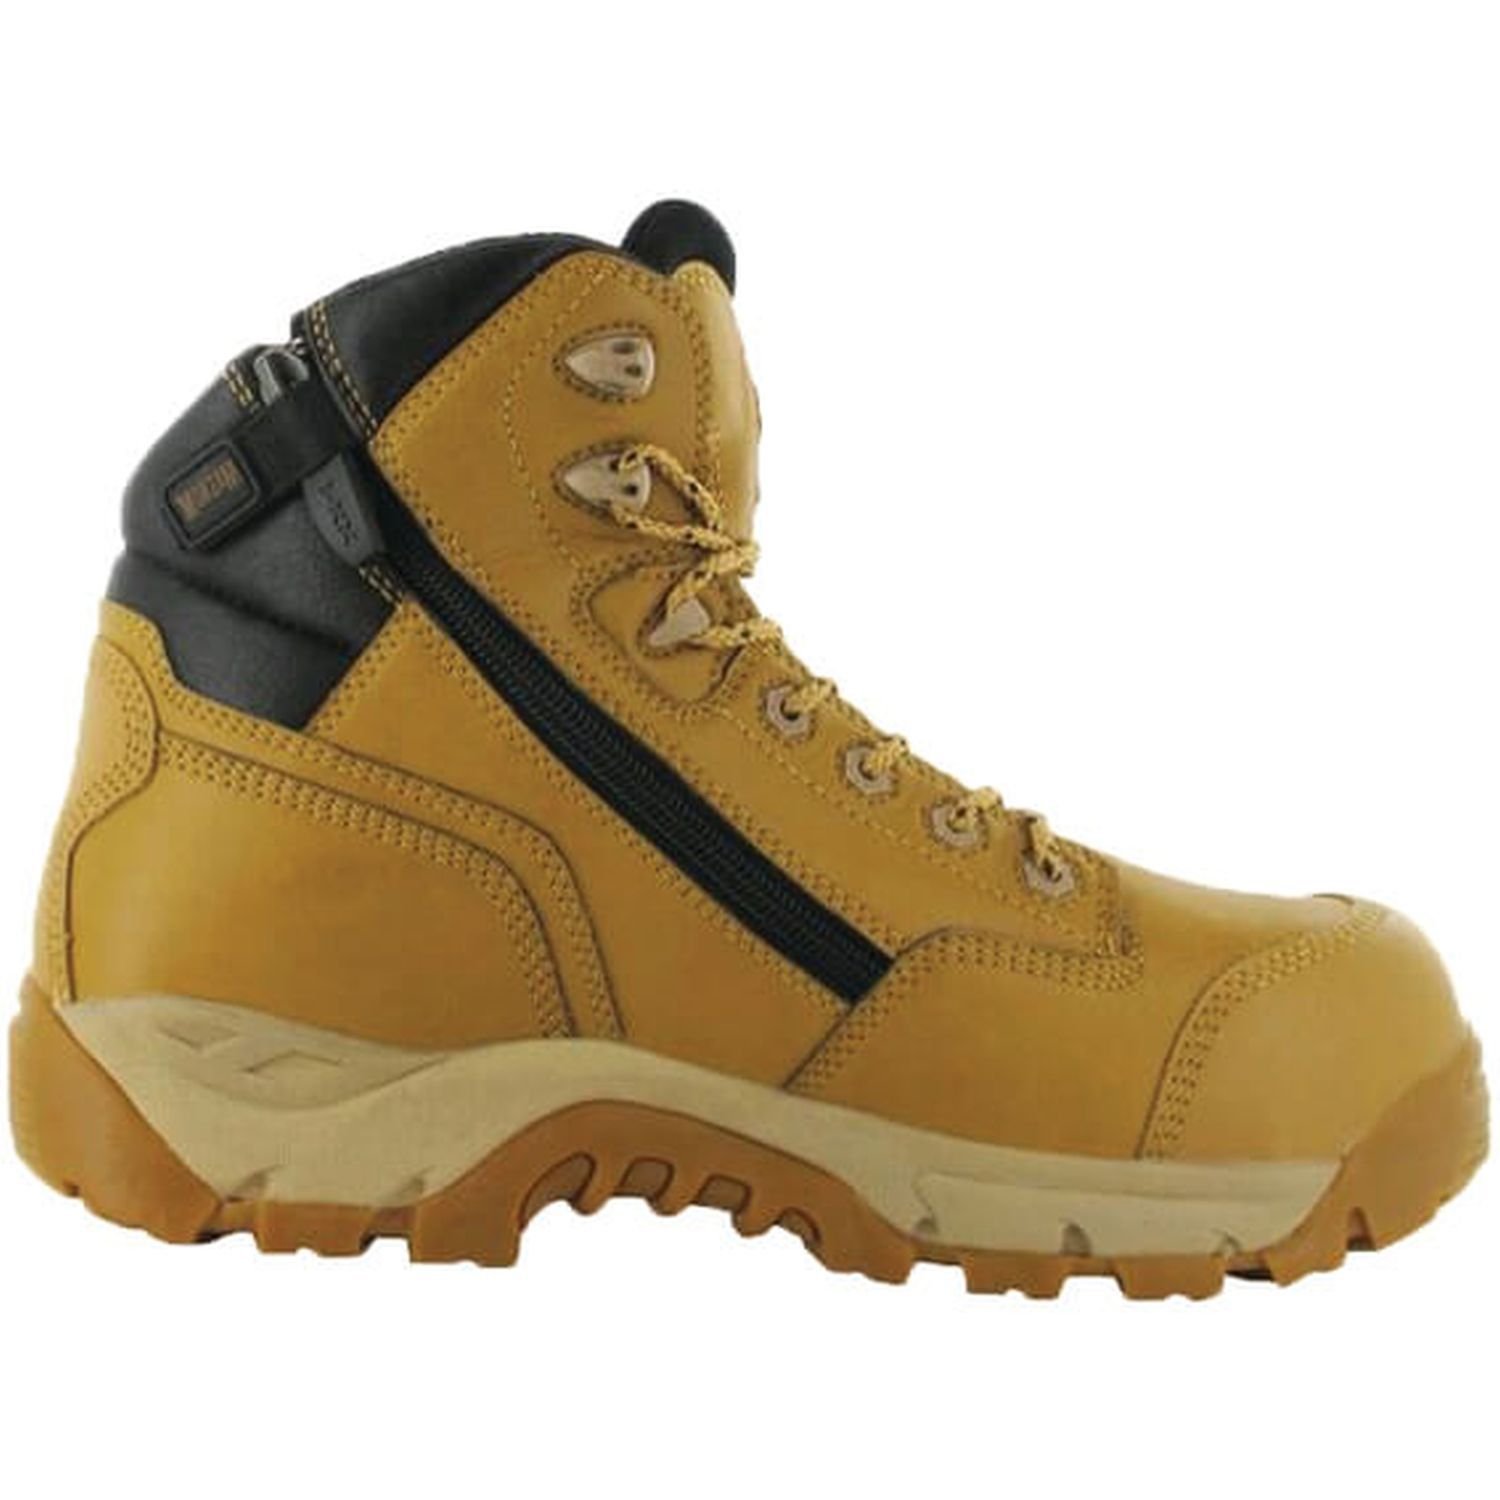 Magnum Precision Max SZ CT Wpi Lace Up/Zip Safety Boot